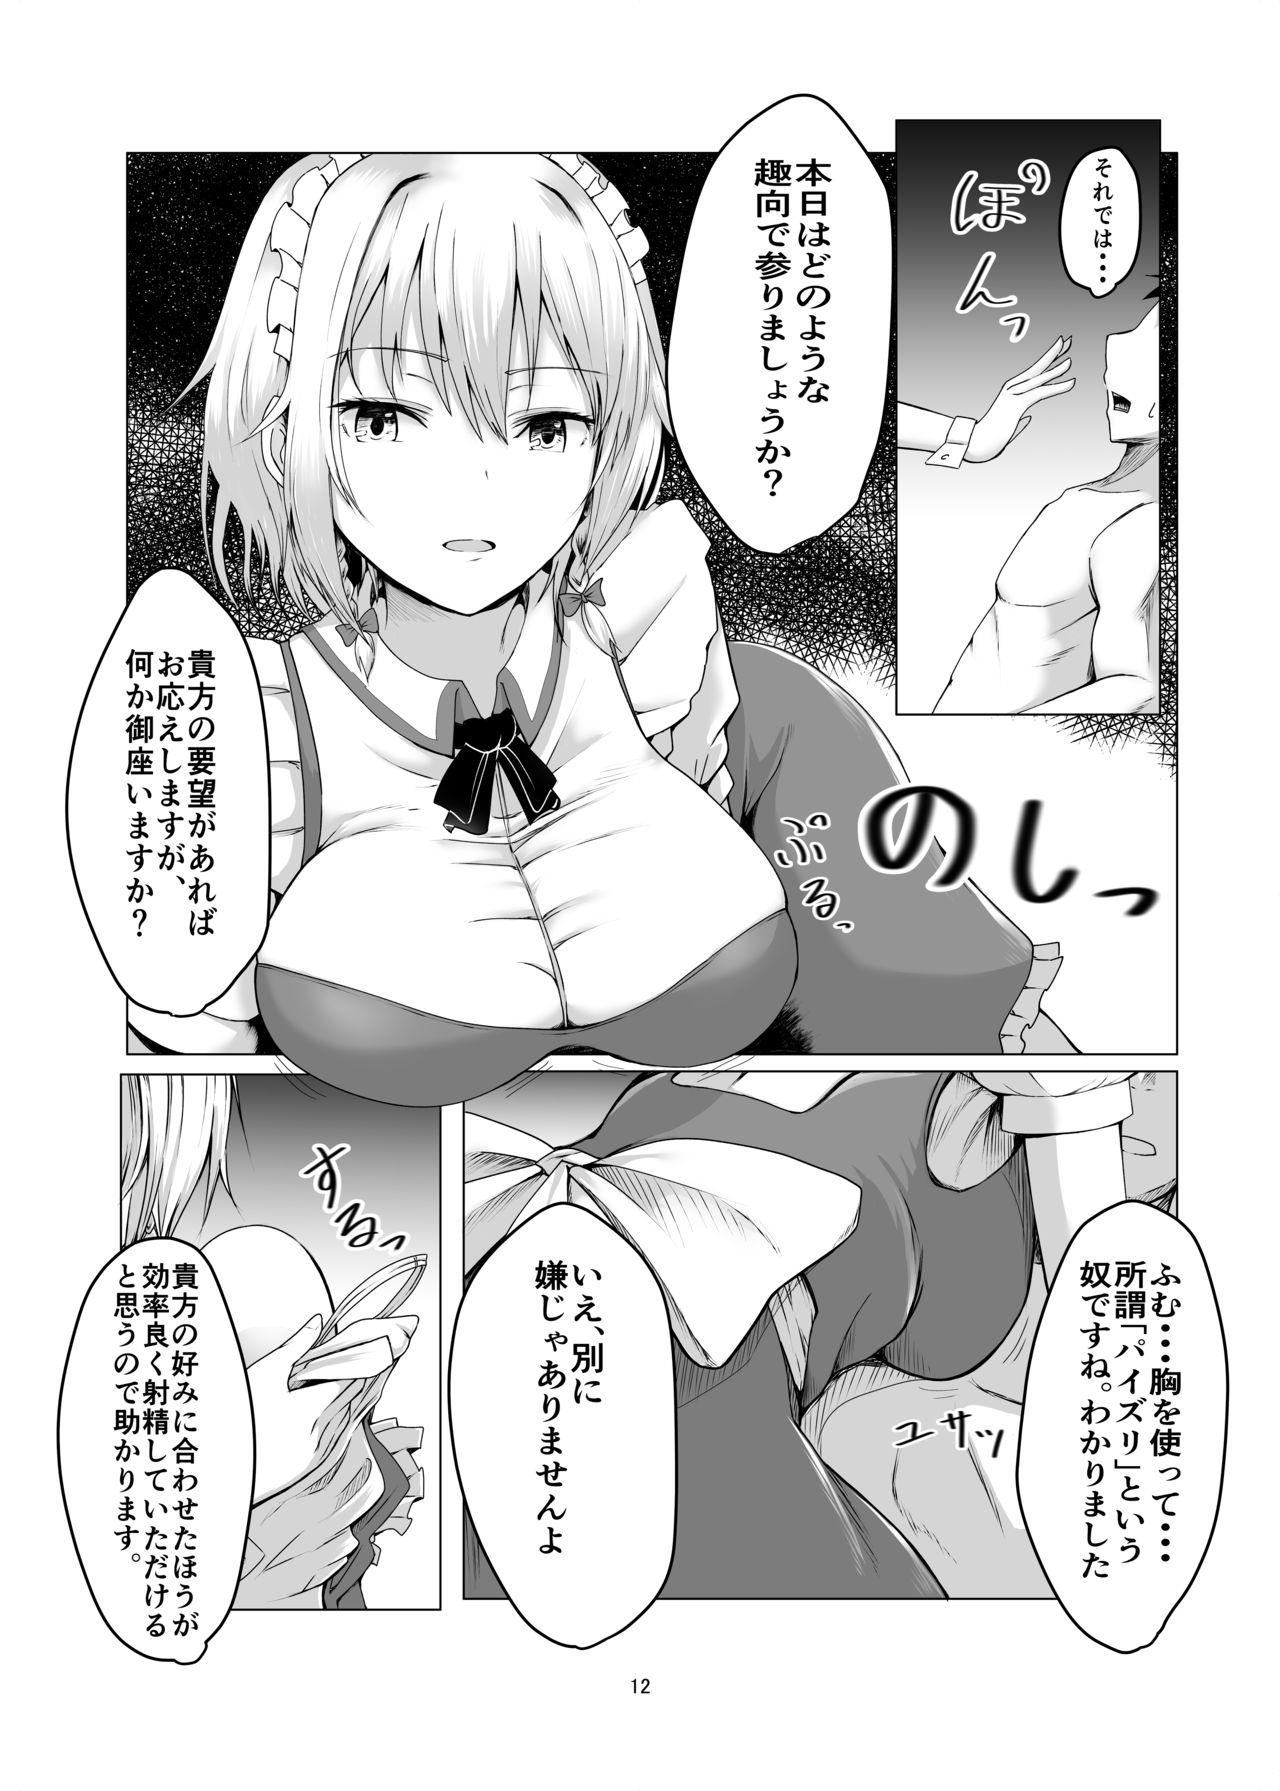 Pink Pussy 咲夜さんに淡々と搾精されるマンガ - Touhou project Lesbian Porn - Page 11